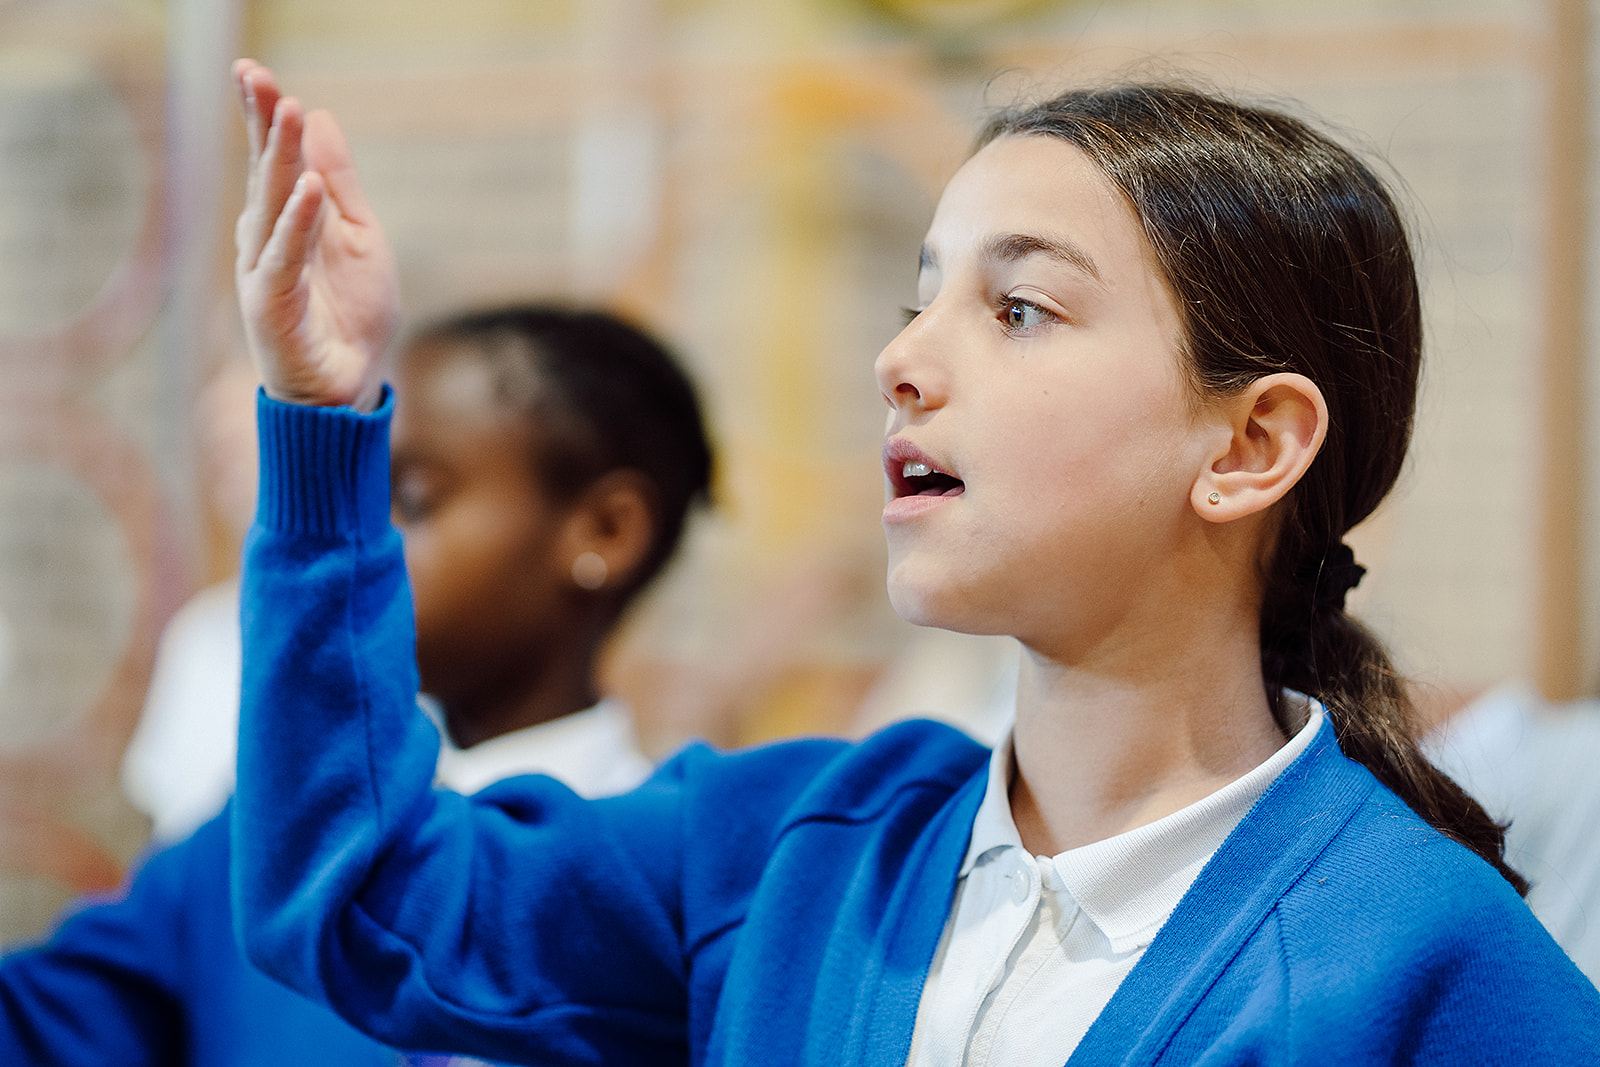 A young girl in a blue cardigan and white shirt is captured mid-song, her expression focused and joyful. Her raised hand suggests active participation in a choir or music class, while a blurred classmate in the background shares in the harmonious activity, illustrating the vibrant and collaborative atmosphere of a Sing Education musical learning experience.